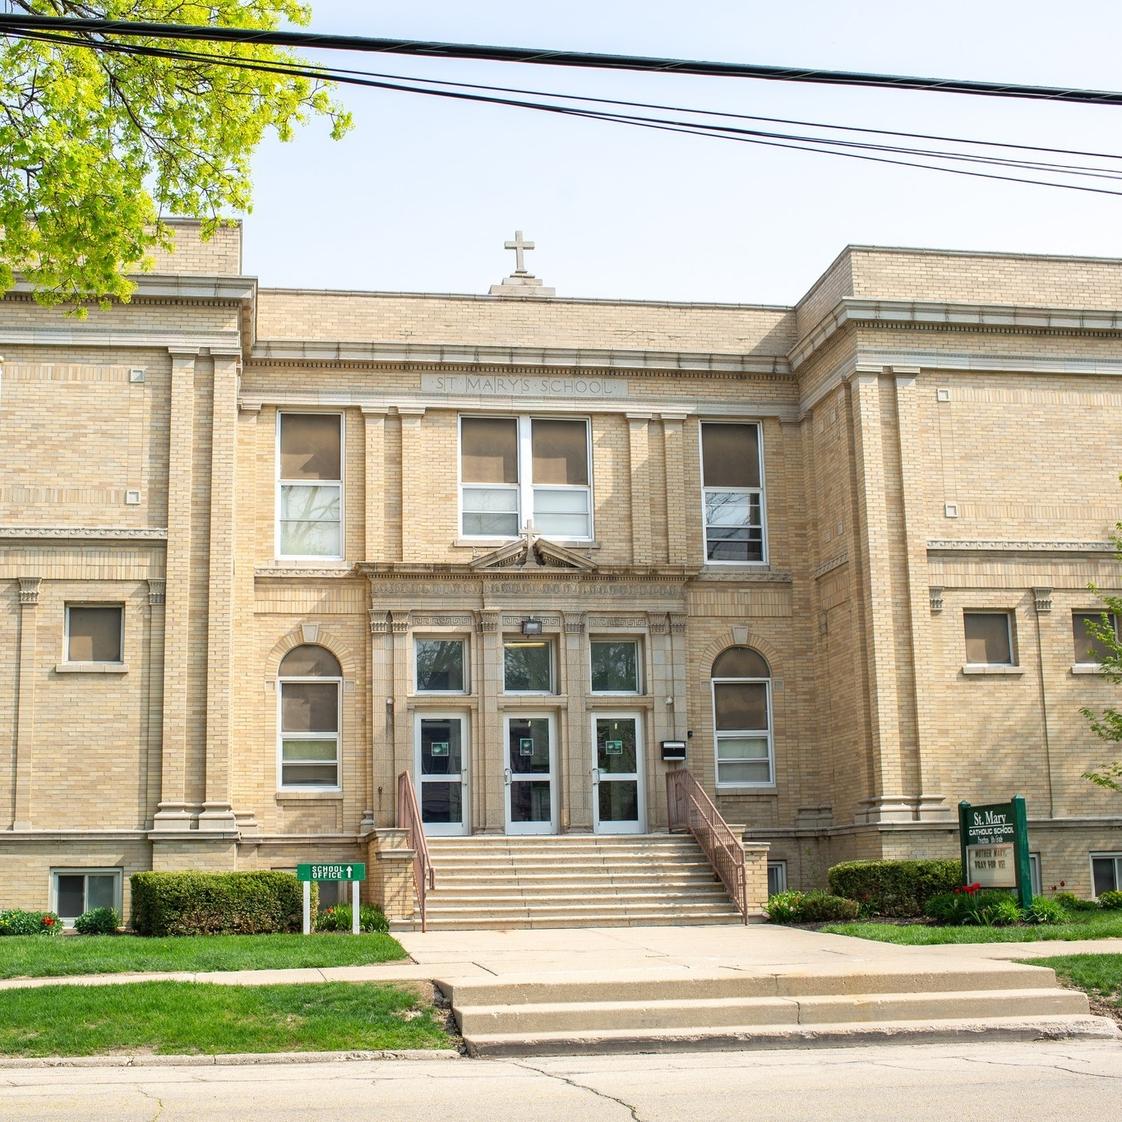 St. Mary Catholic School Photo #1 - St. Mary Catholic School, founded in 1917, offers an inclusive educational program rooted in Catholic values.